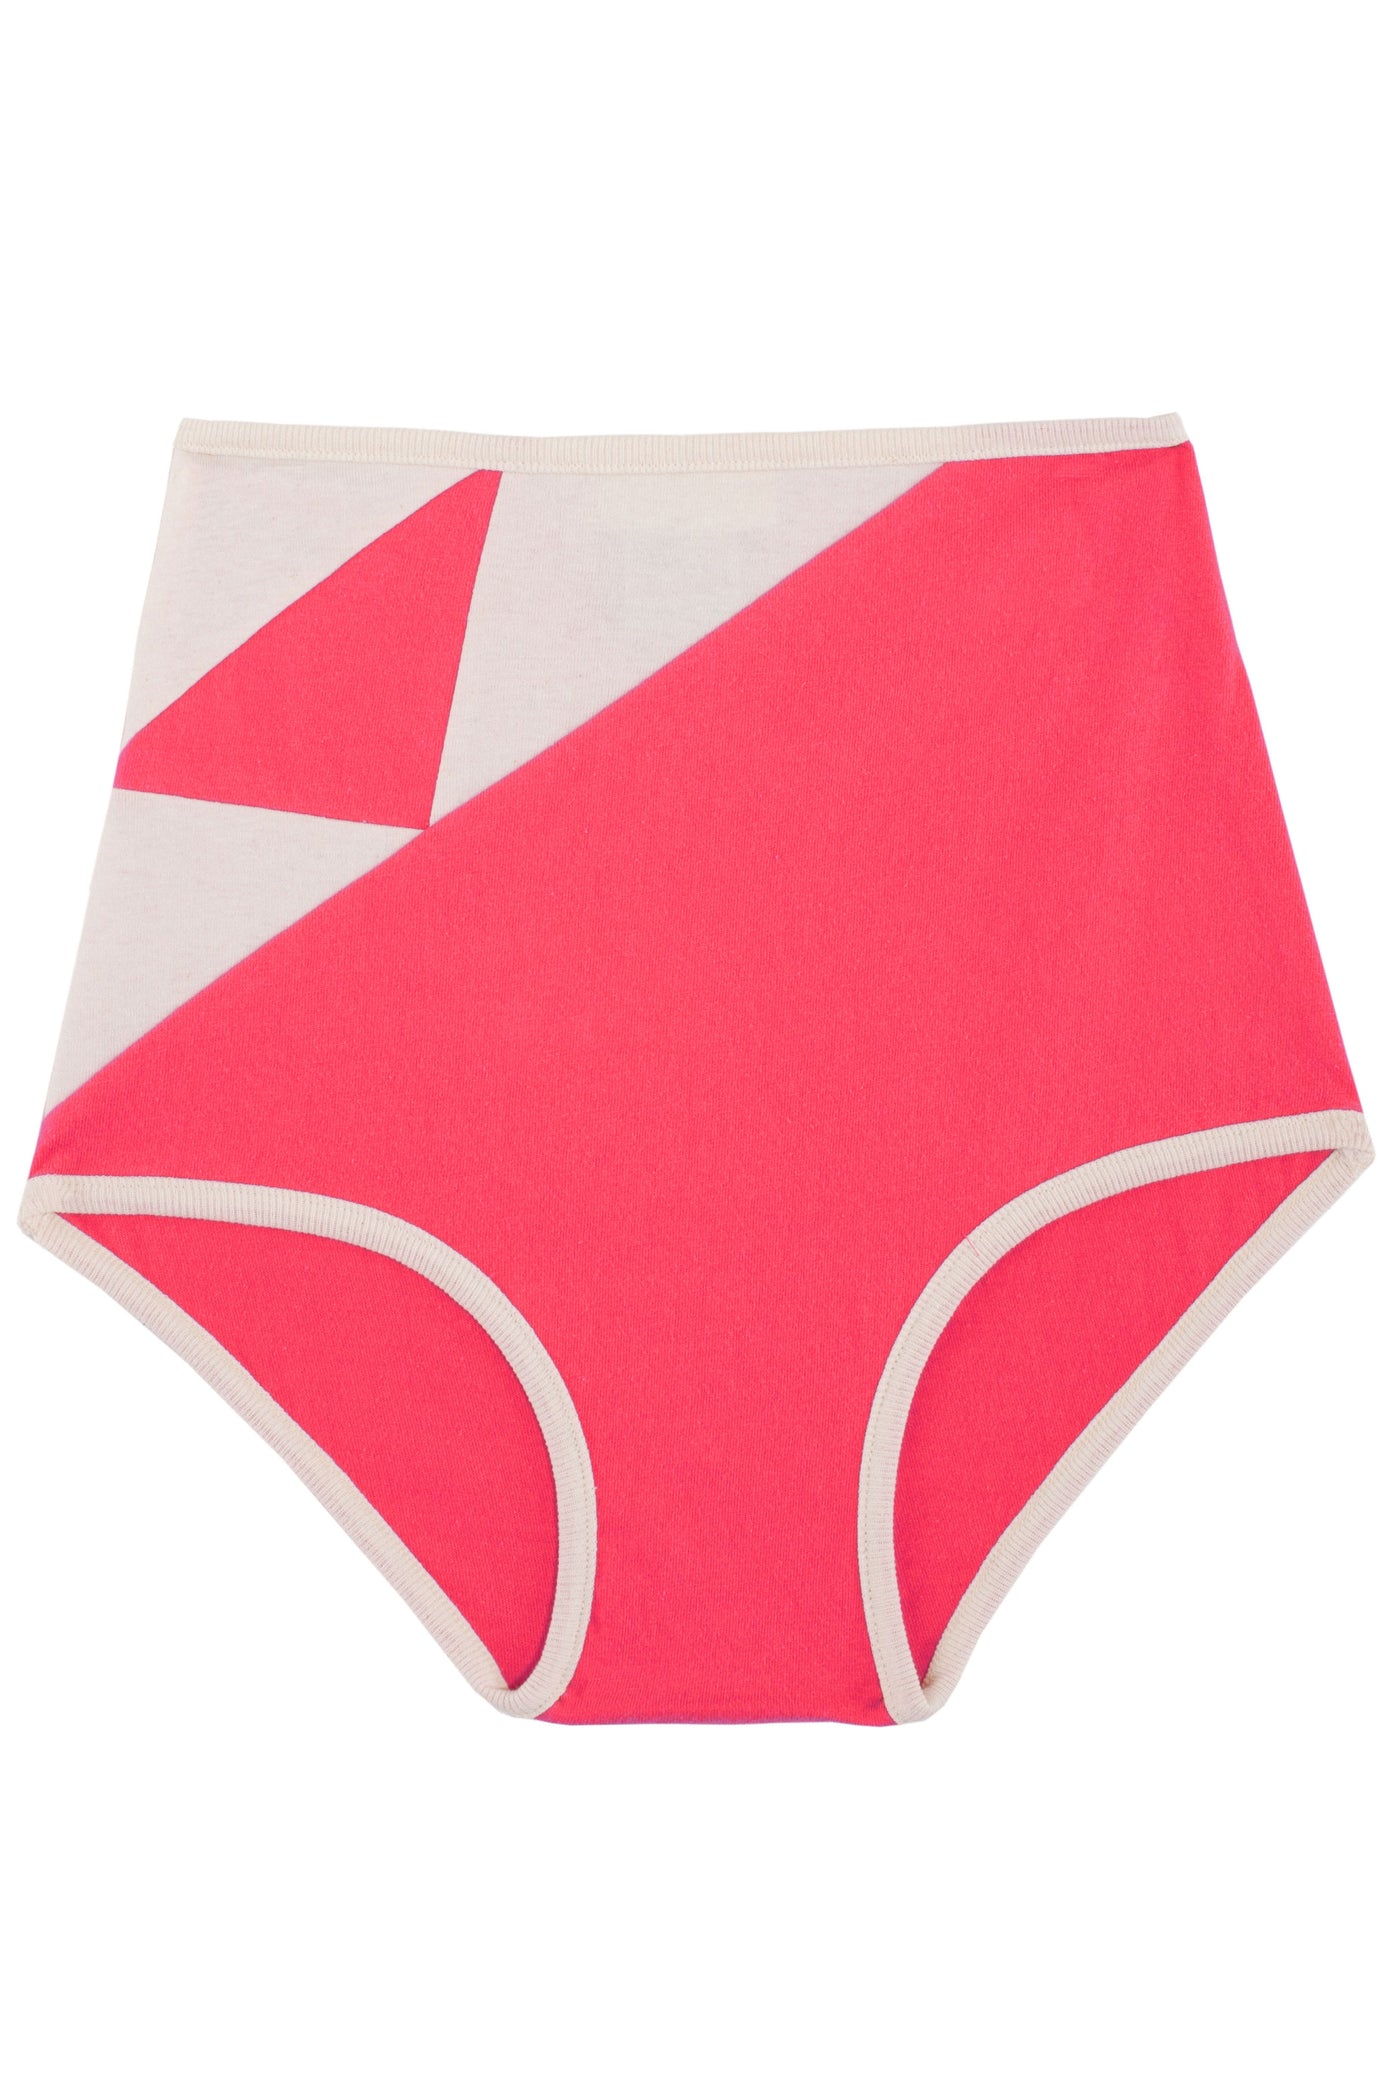 Exclusive Hot Pink Birds in The Air Housepants